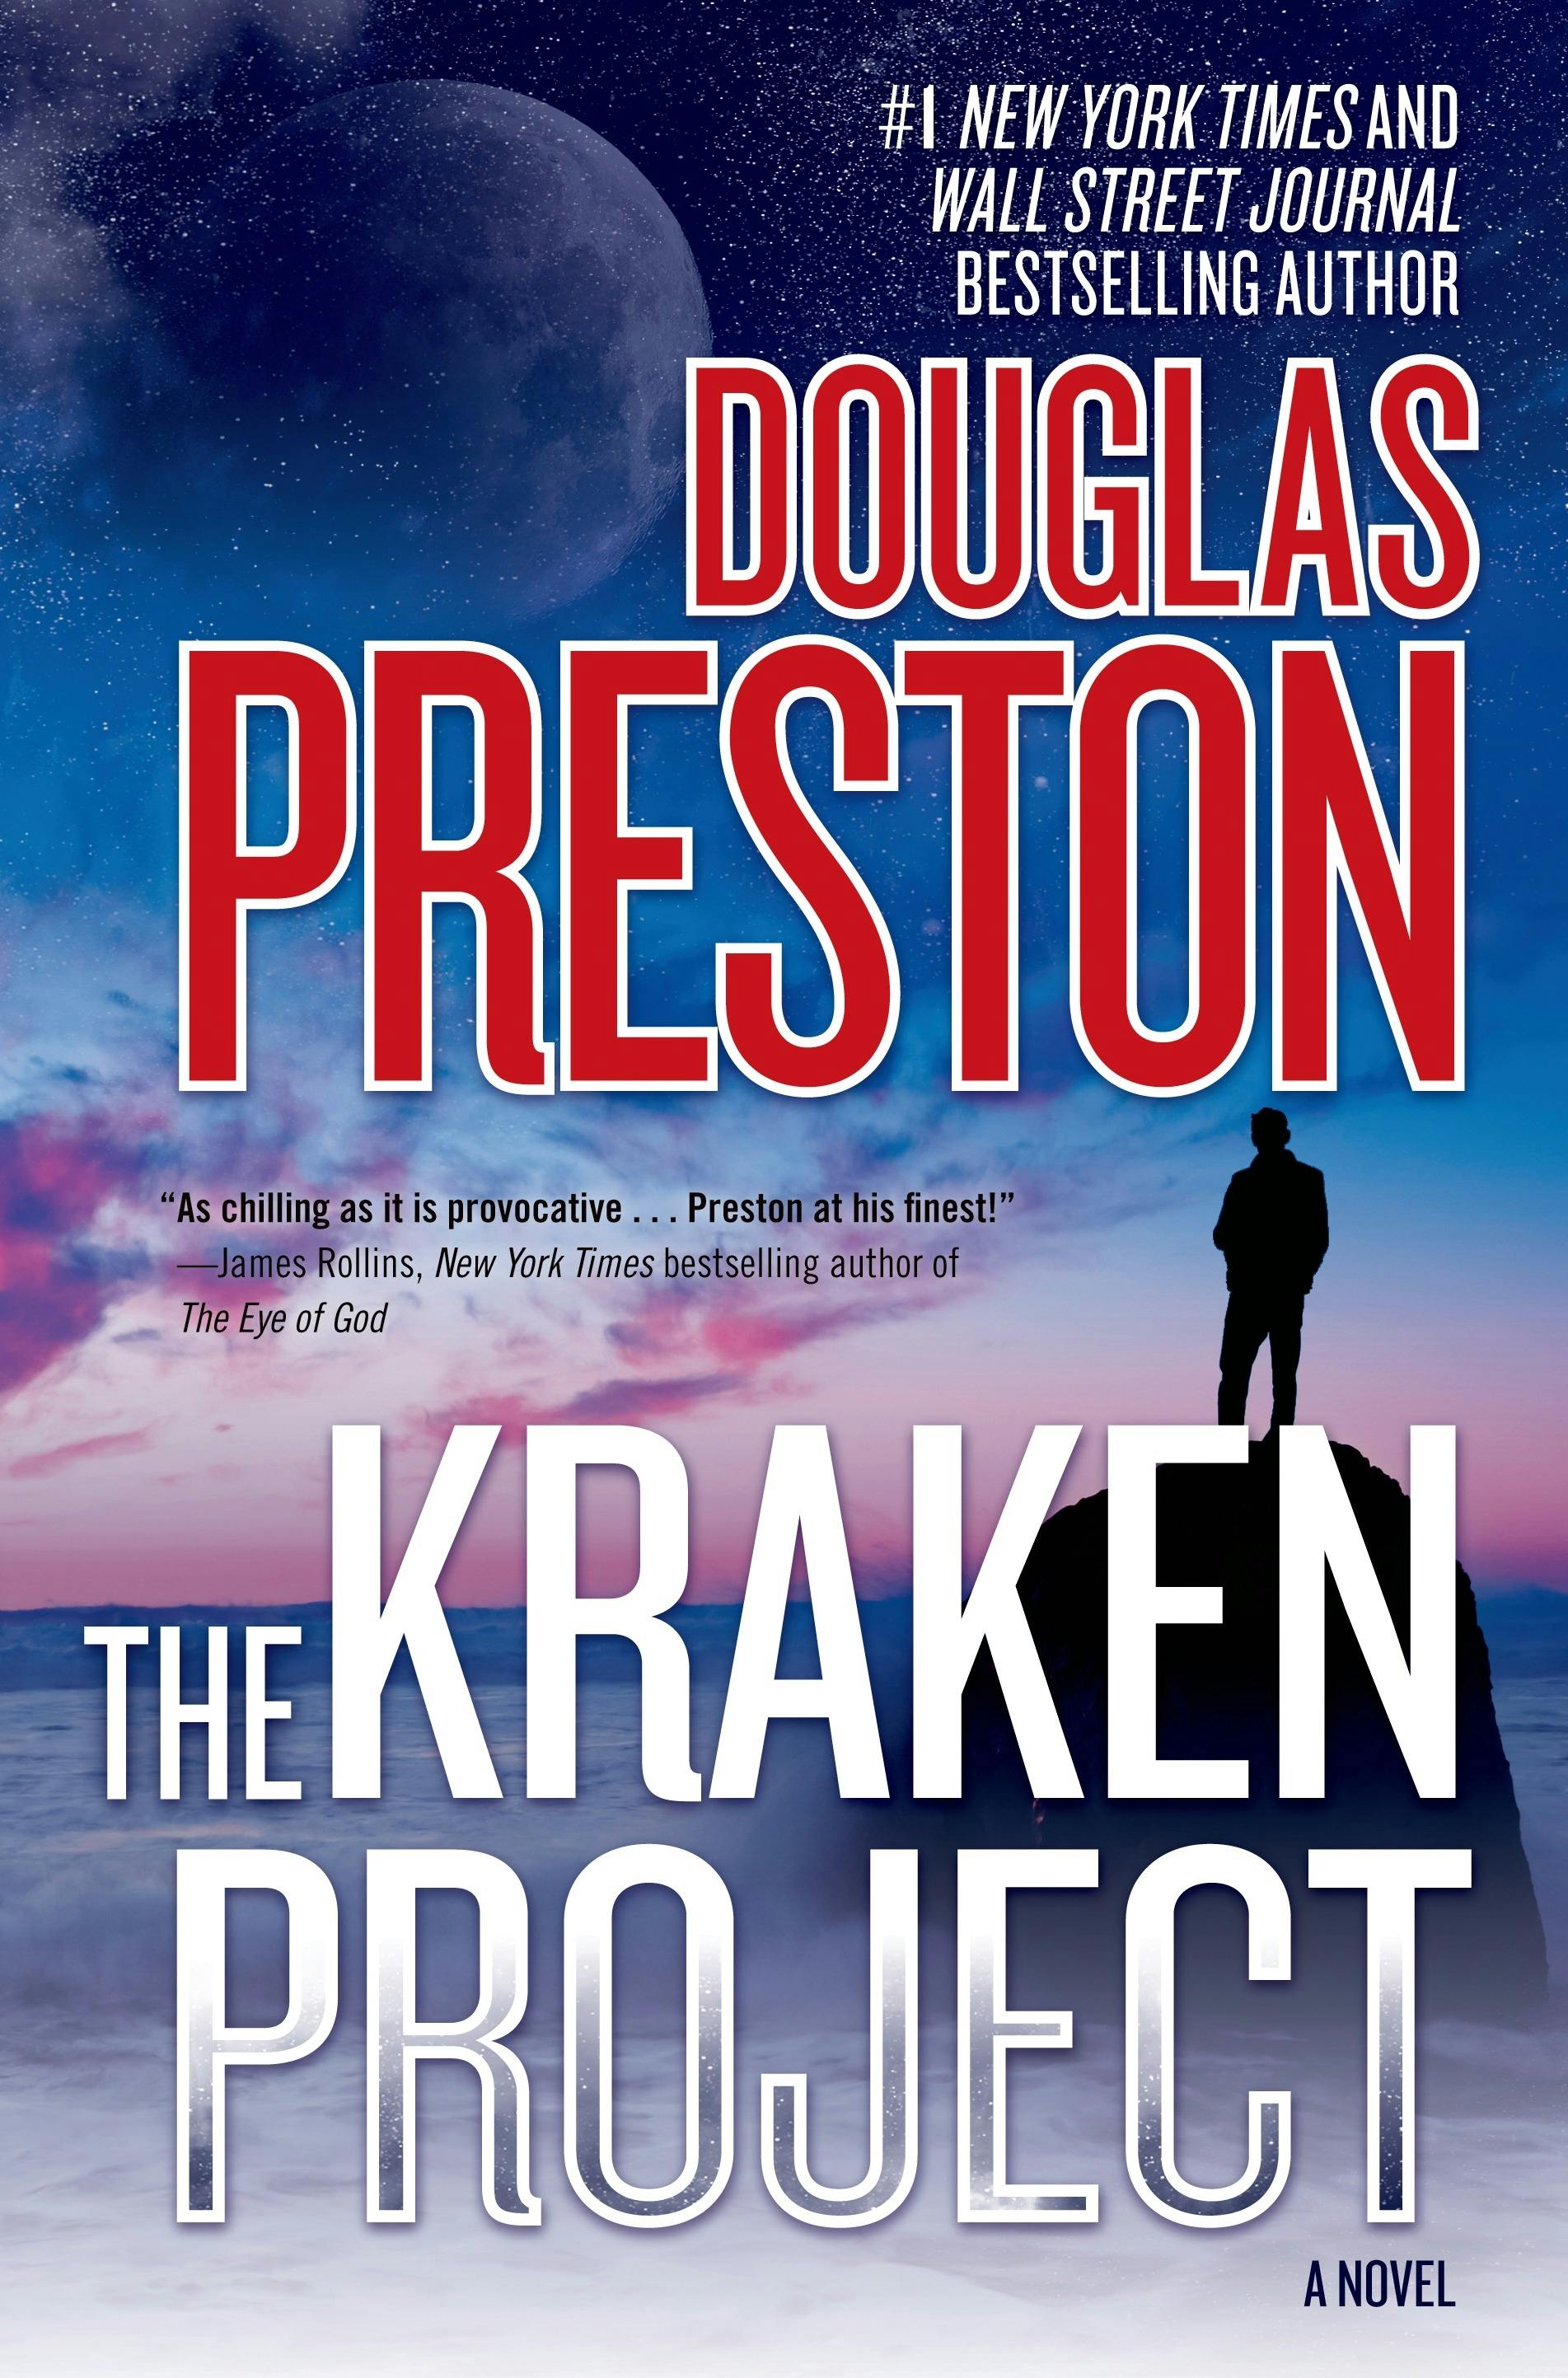 Cover for the book titled as: The Kraken Project